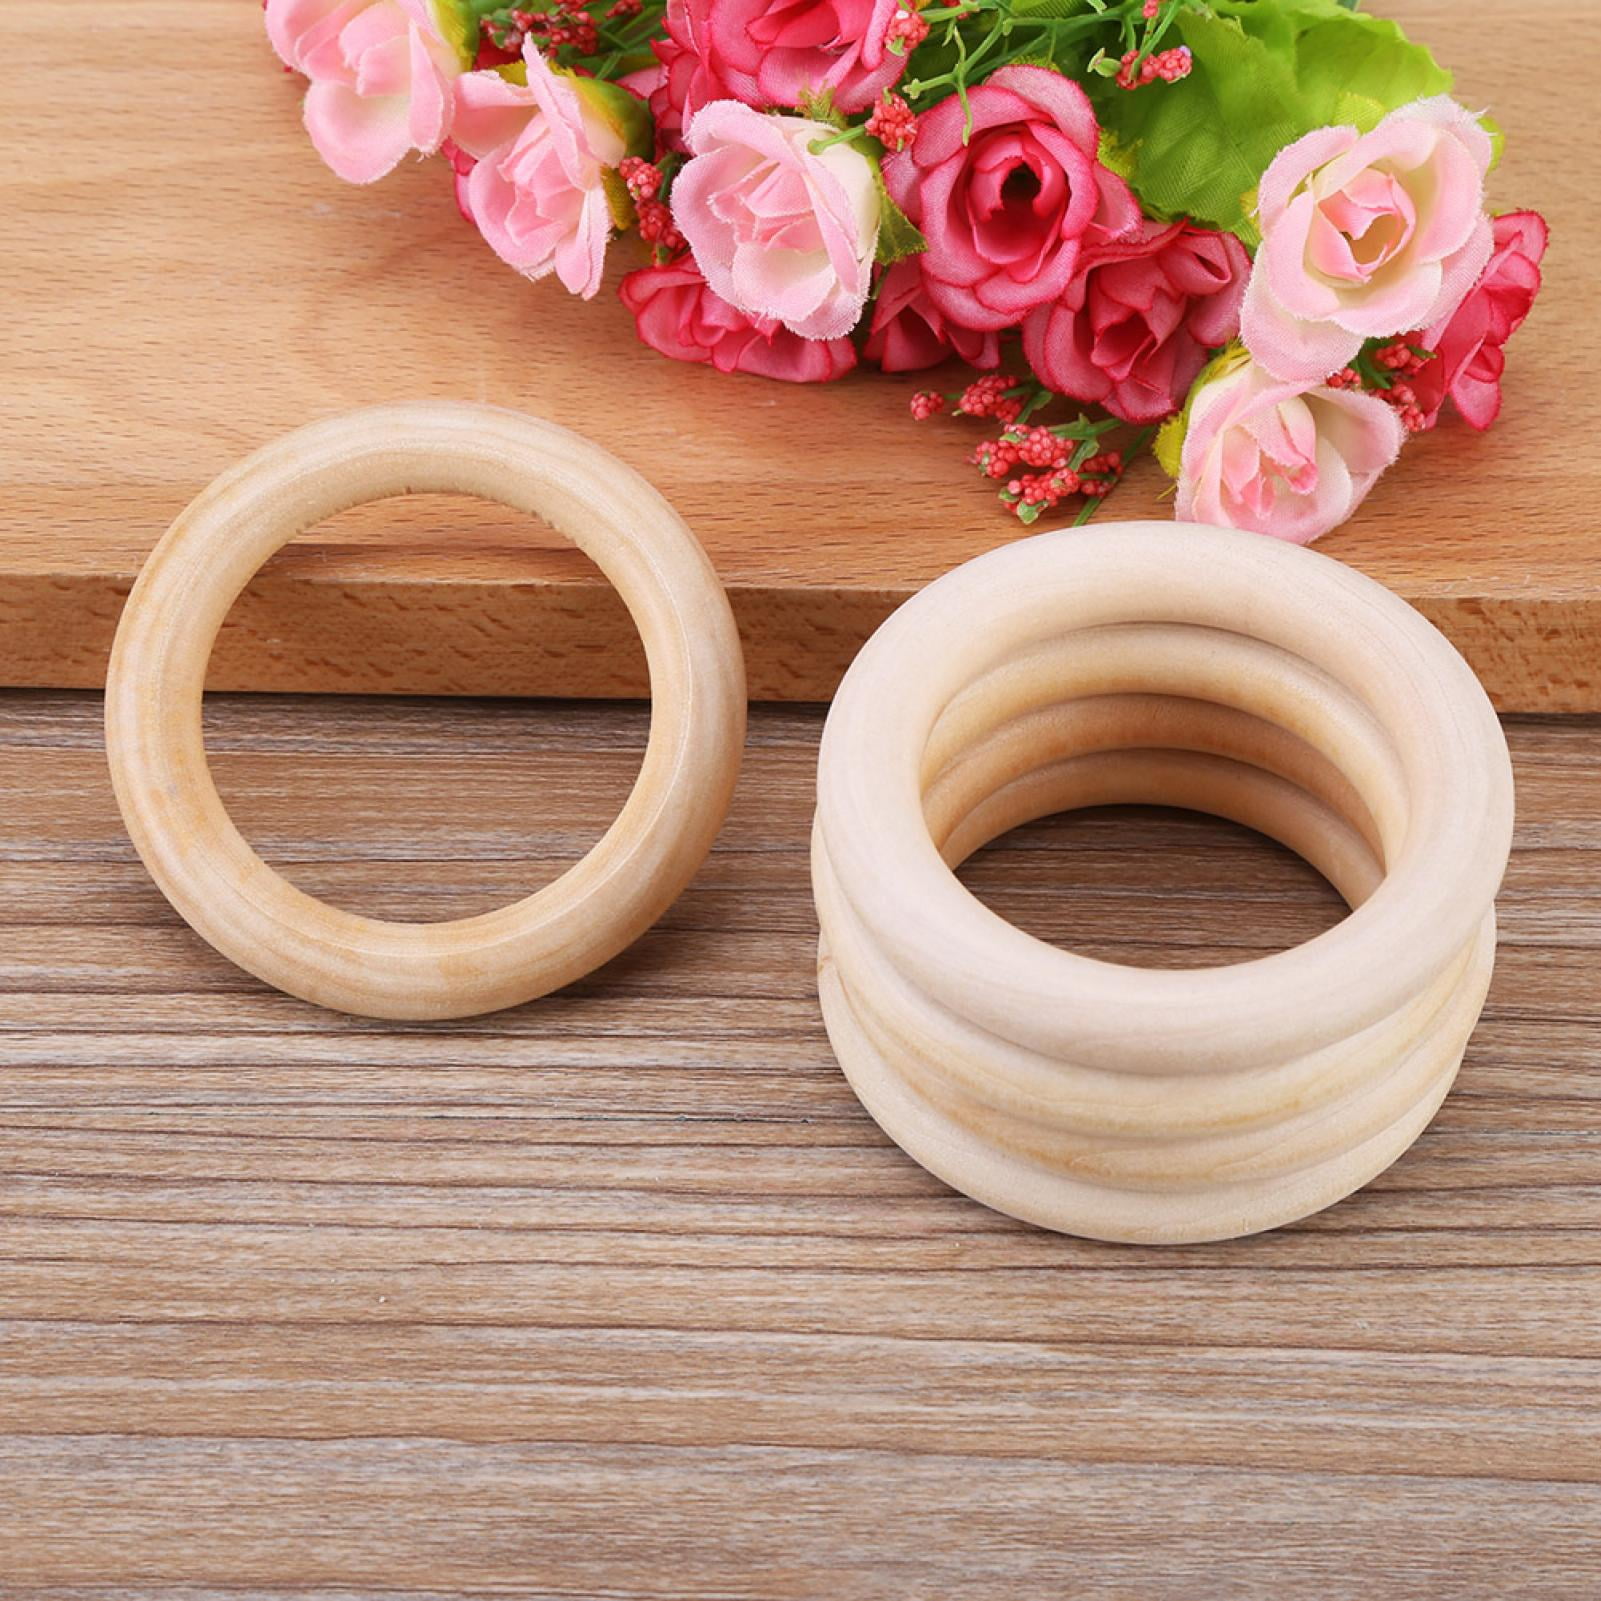 Amazon.com : Walnut Tree - Maple Wood Teething Rings, Natural Wooden  Teething Ring, Handcrafted Baby Teether, Plastic & Lead-Free Teething Ring,  Baby Teether Toys, 3 Inches, Set of 2 : Baby